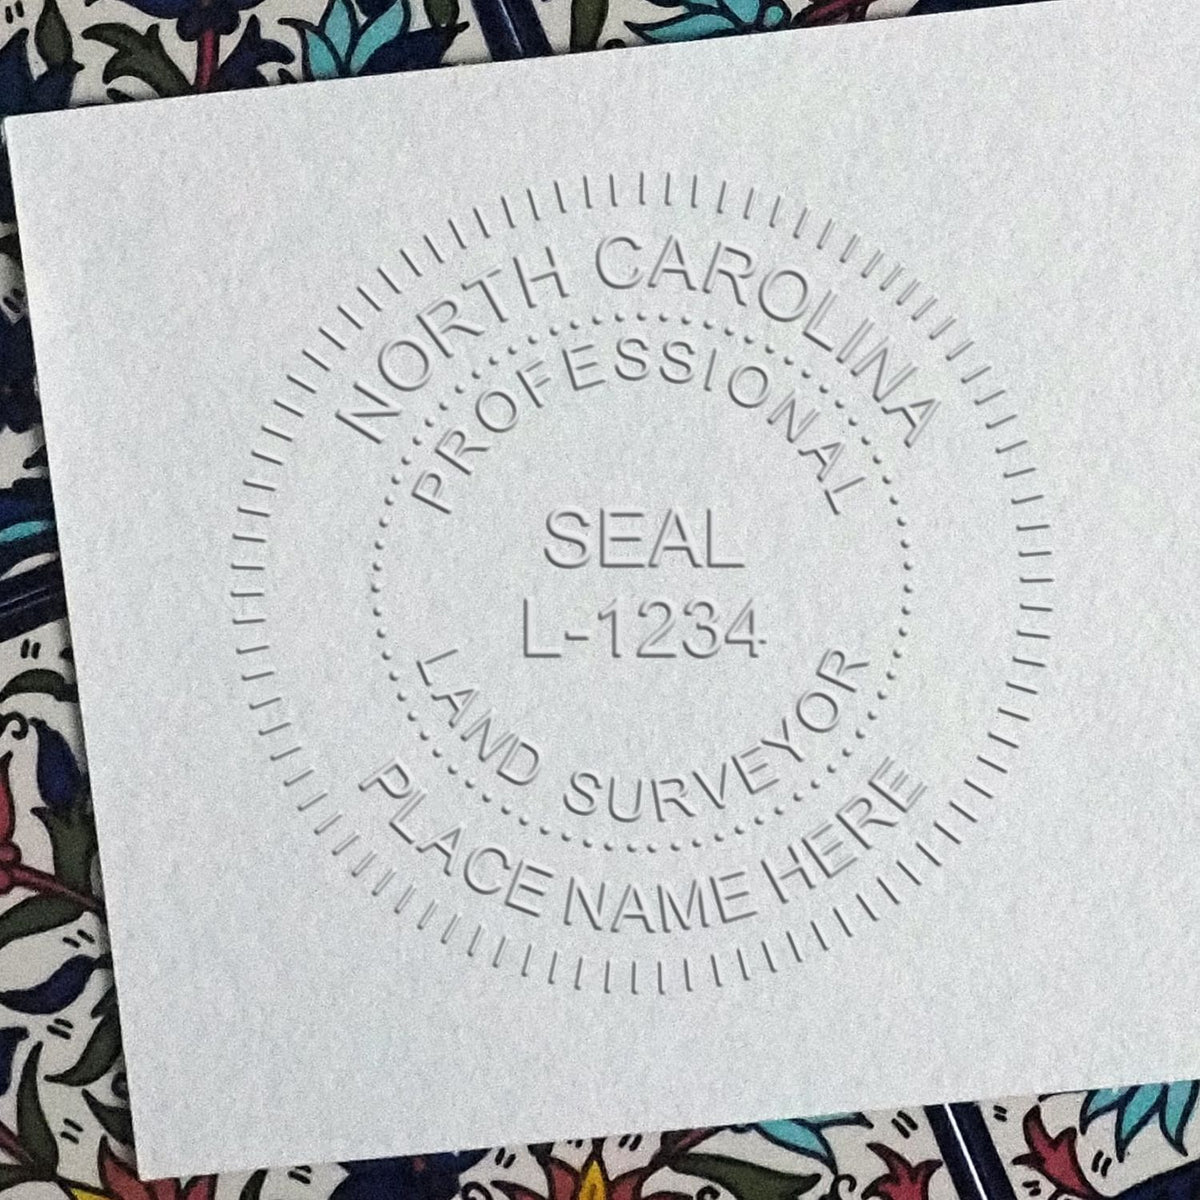 A photograph of the State of North Carolina Soft Land Surveyor Embossing Seal stamp impression reveals a vivid, professional image of the on paper.